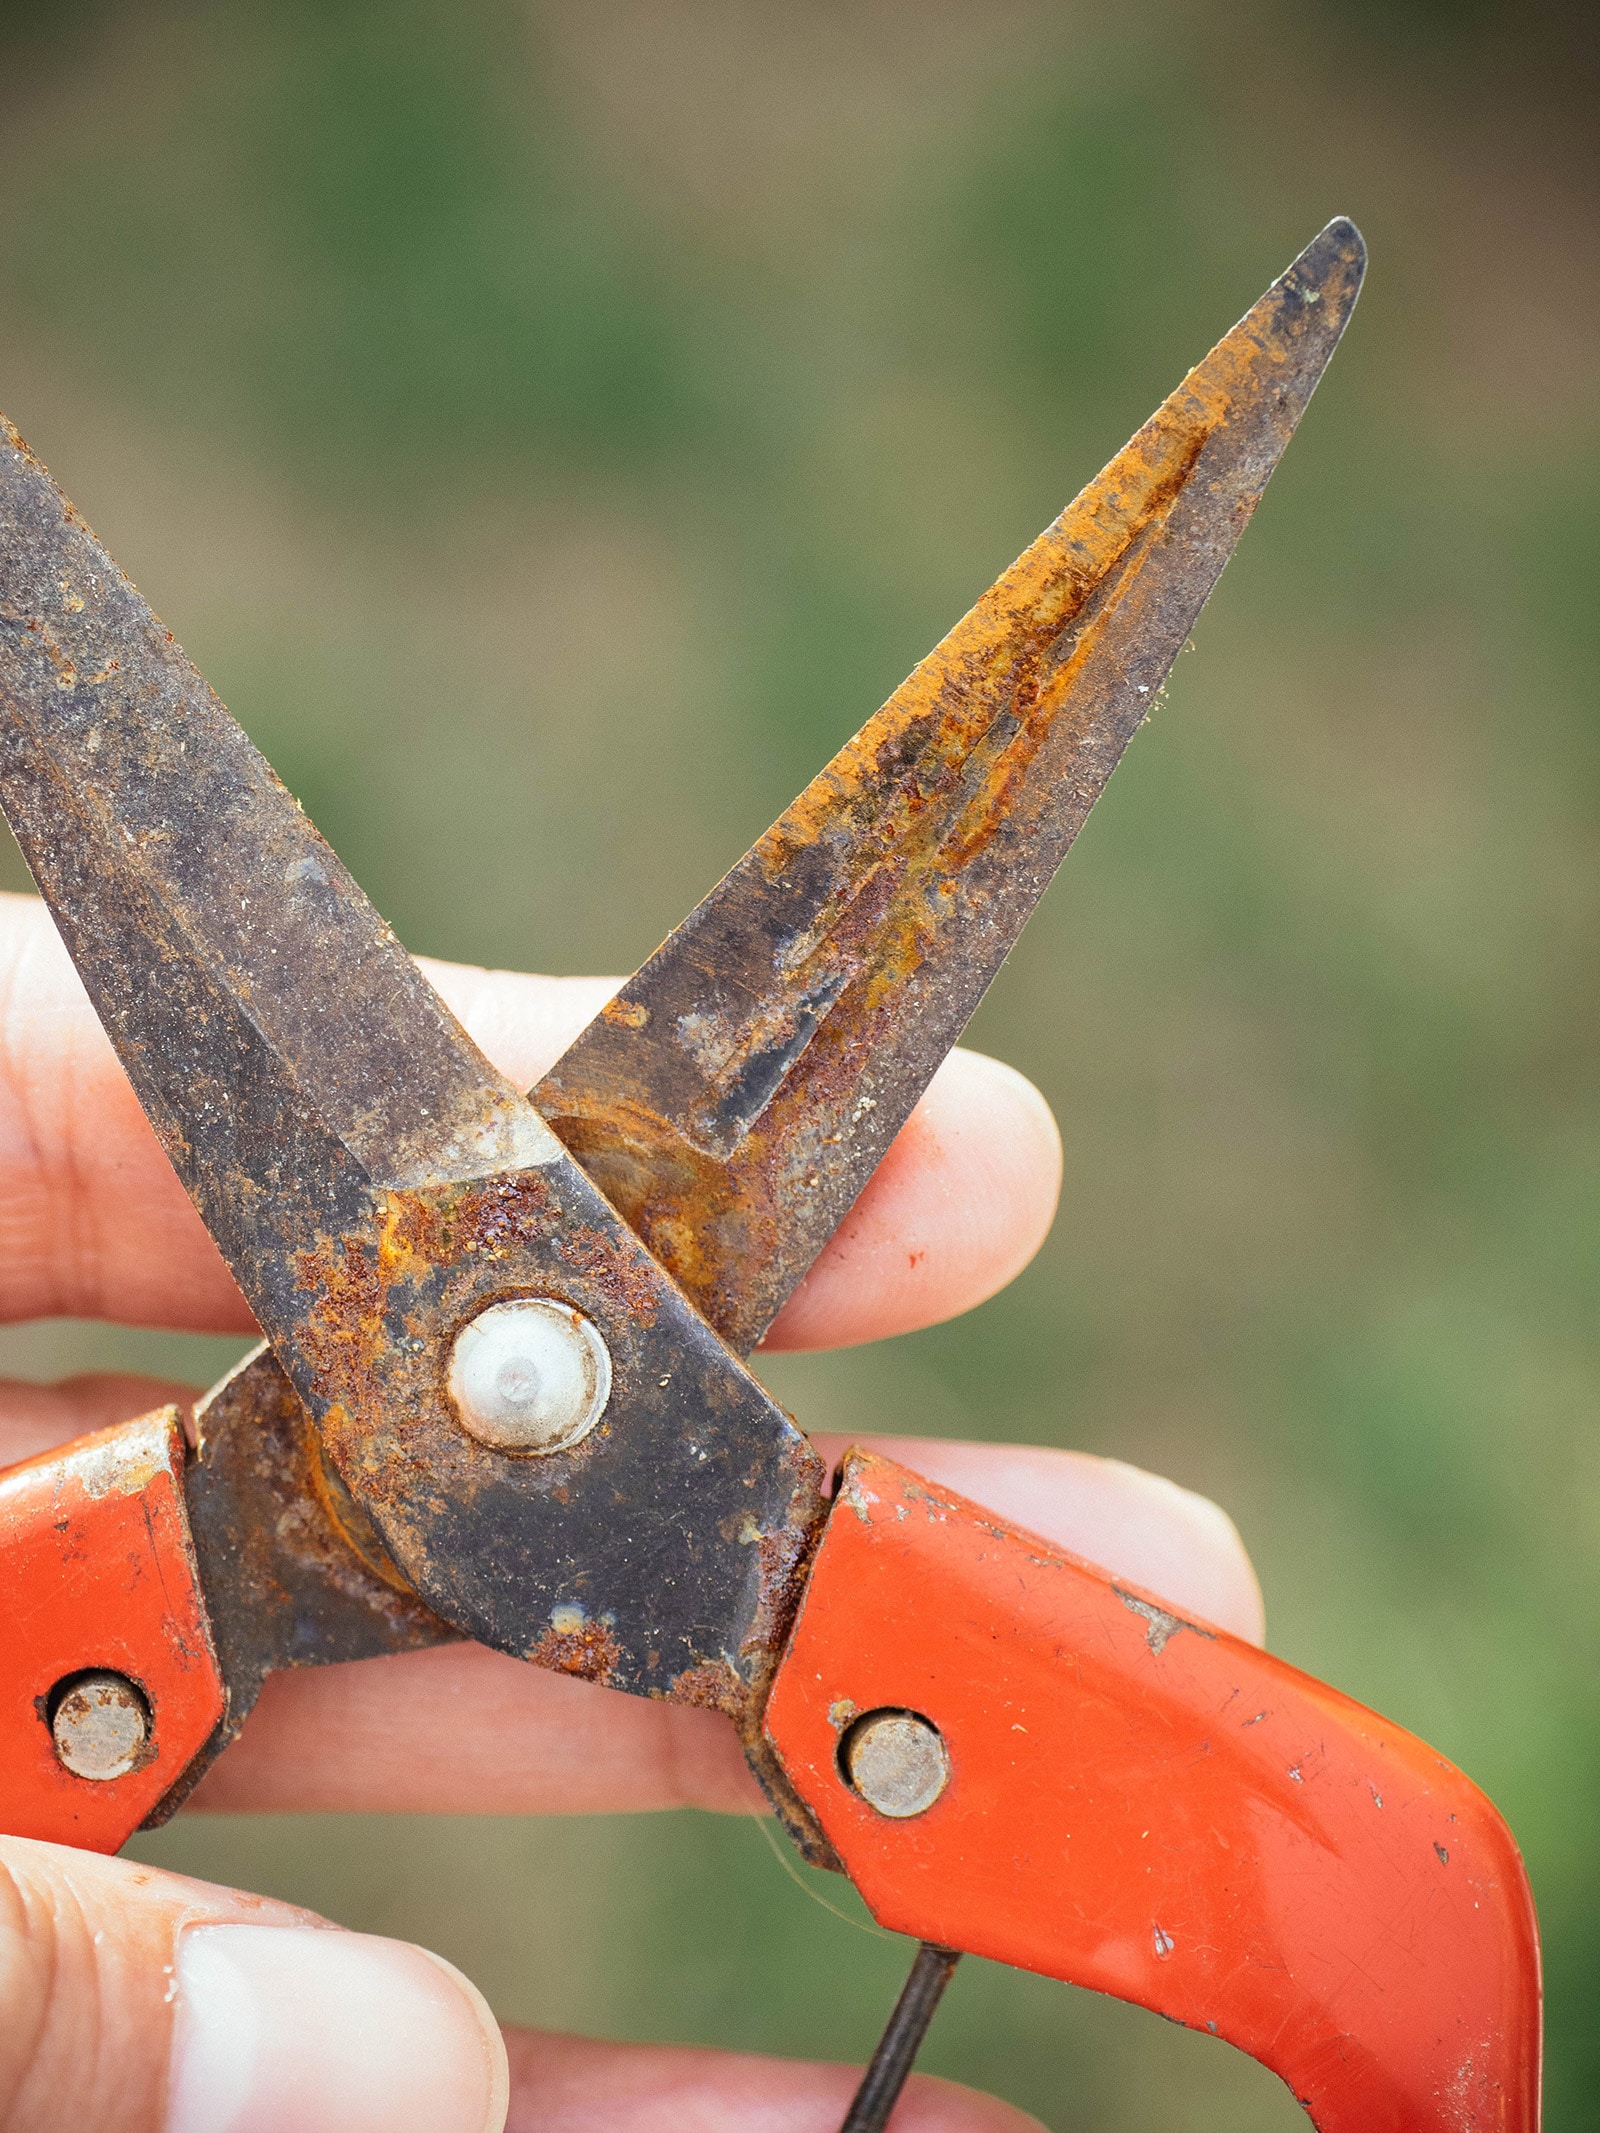 How to Clean Garden Pruners and Keep Them in Tip-Top Shape